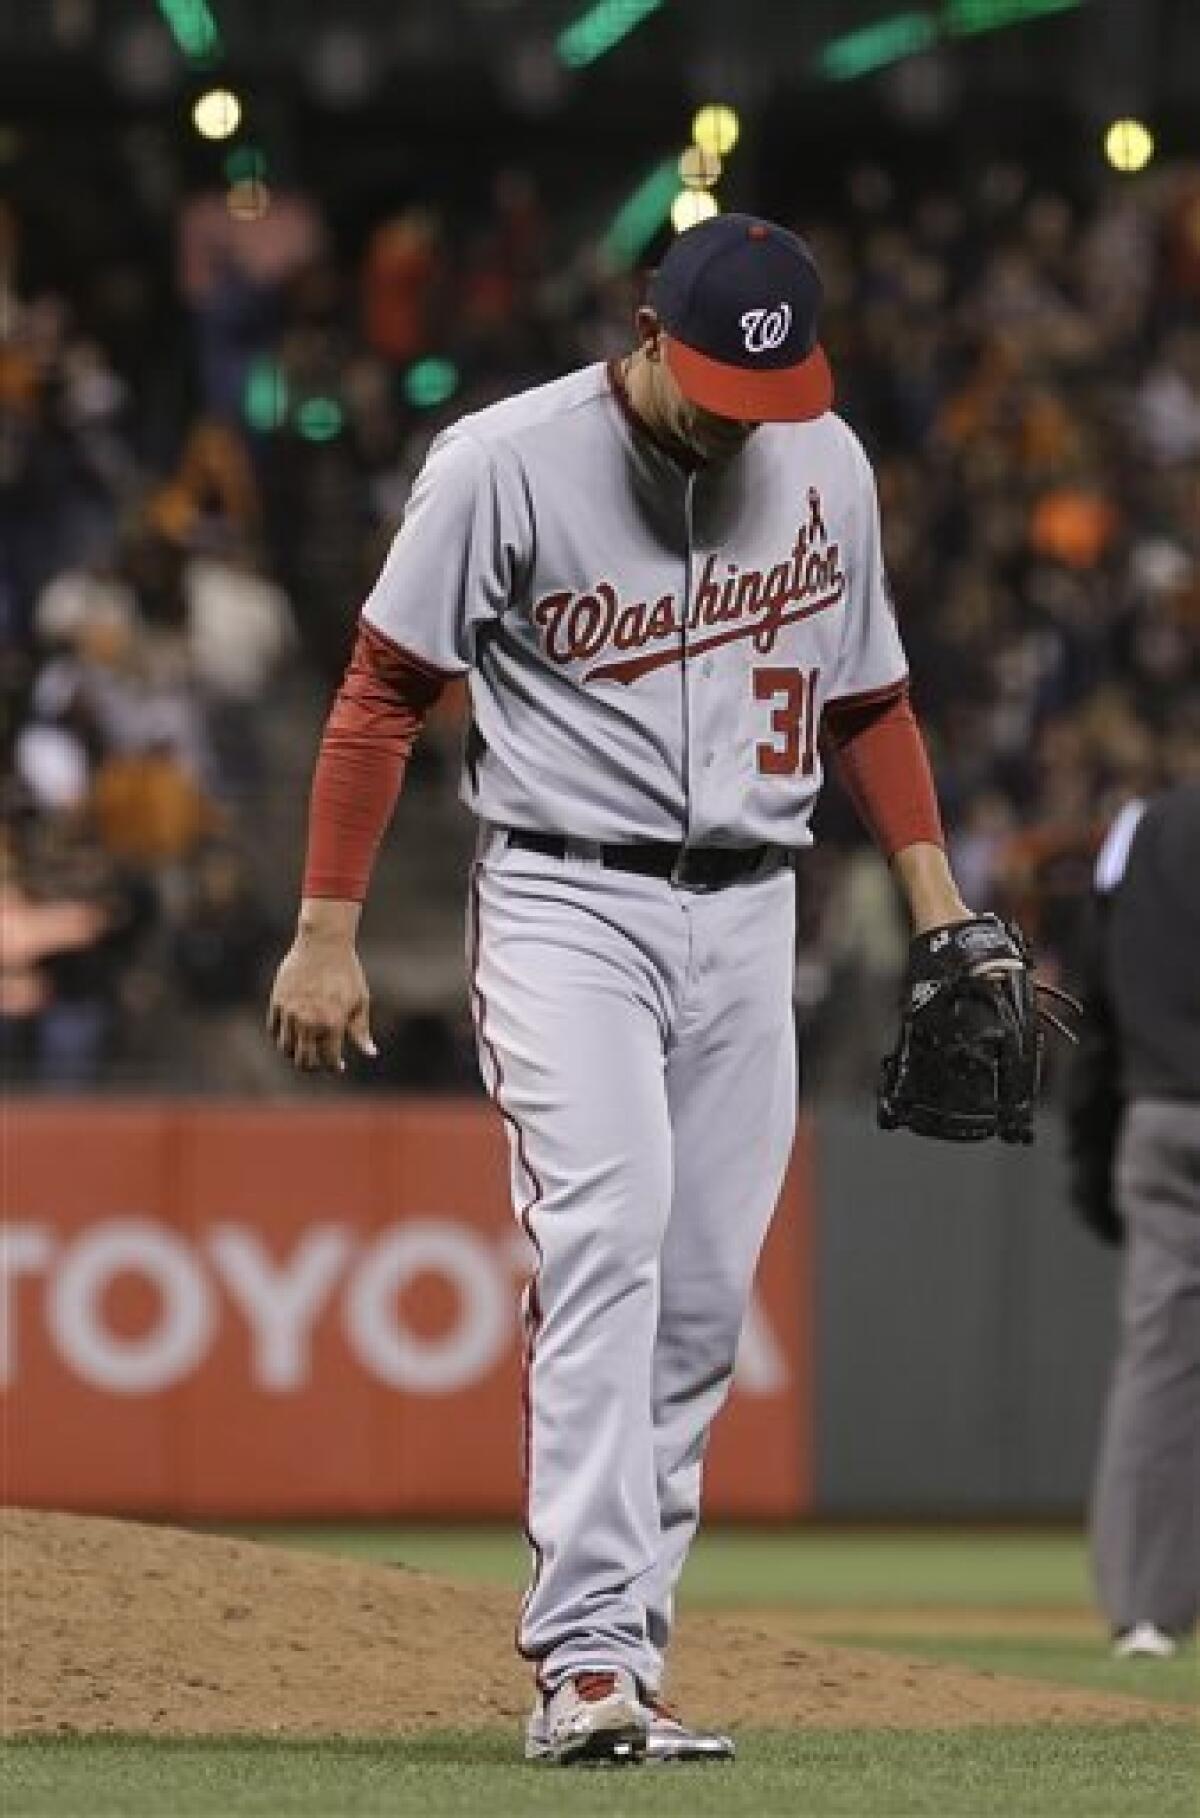 Nats collapse late, lose 4-2 to Giants in 10th - The San Diego